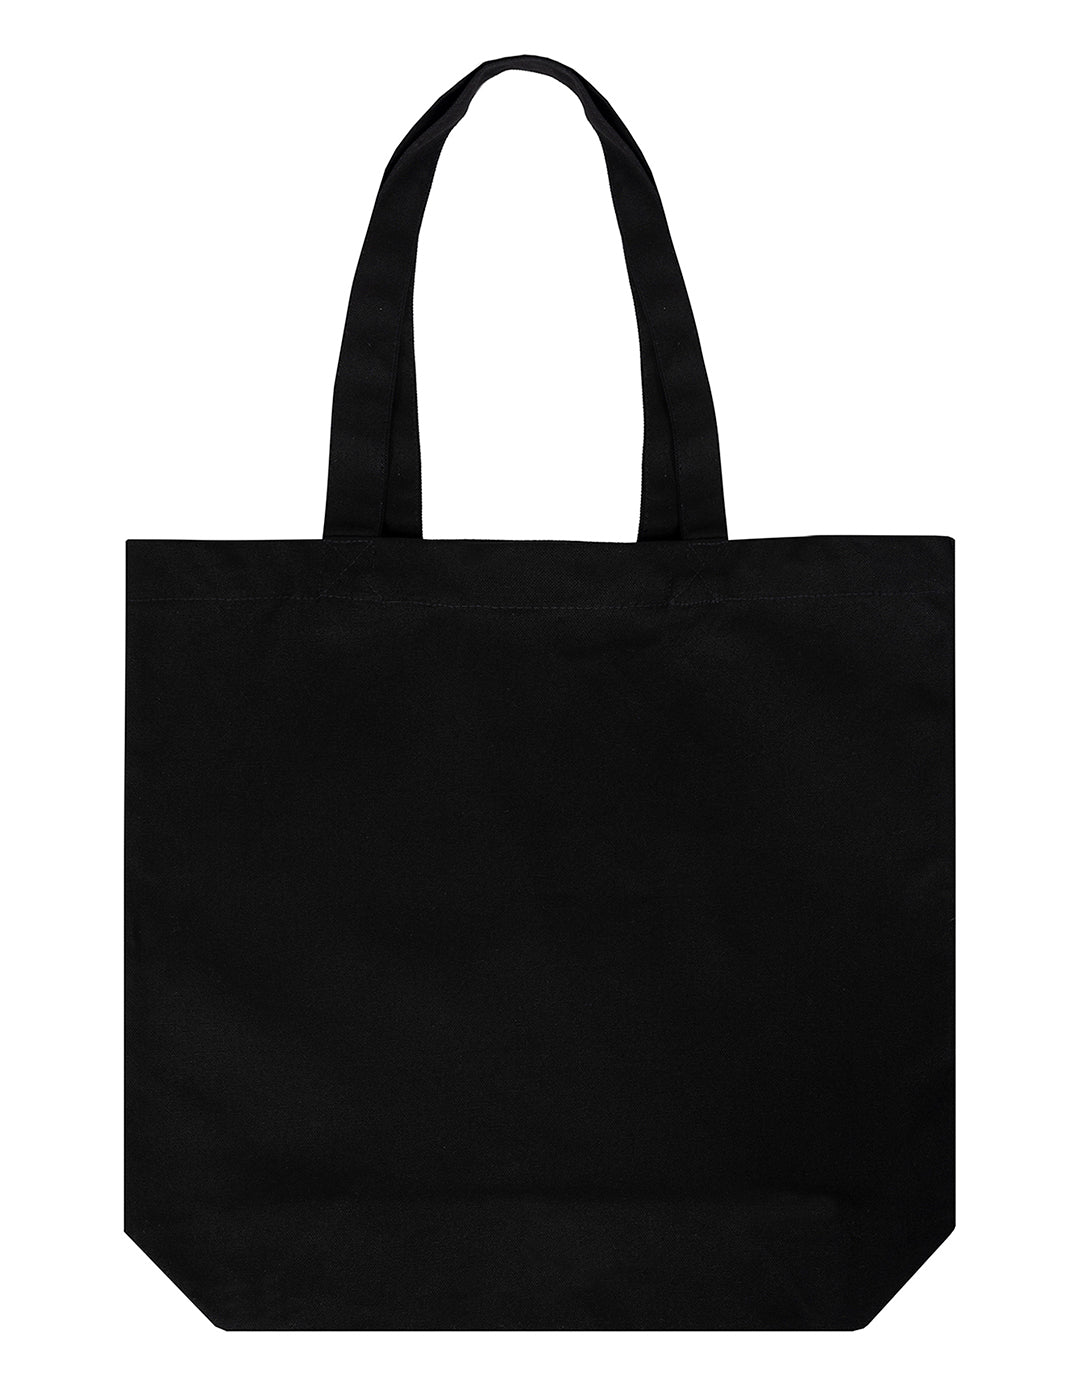 TOTEBAG NEGRO BY SEALOVERS